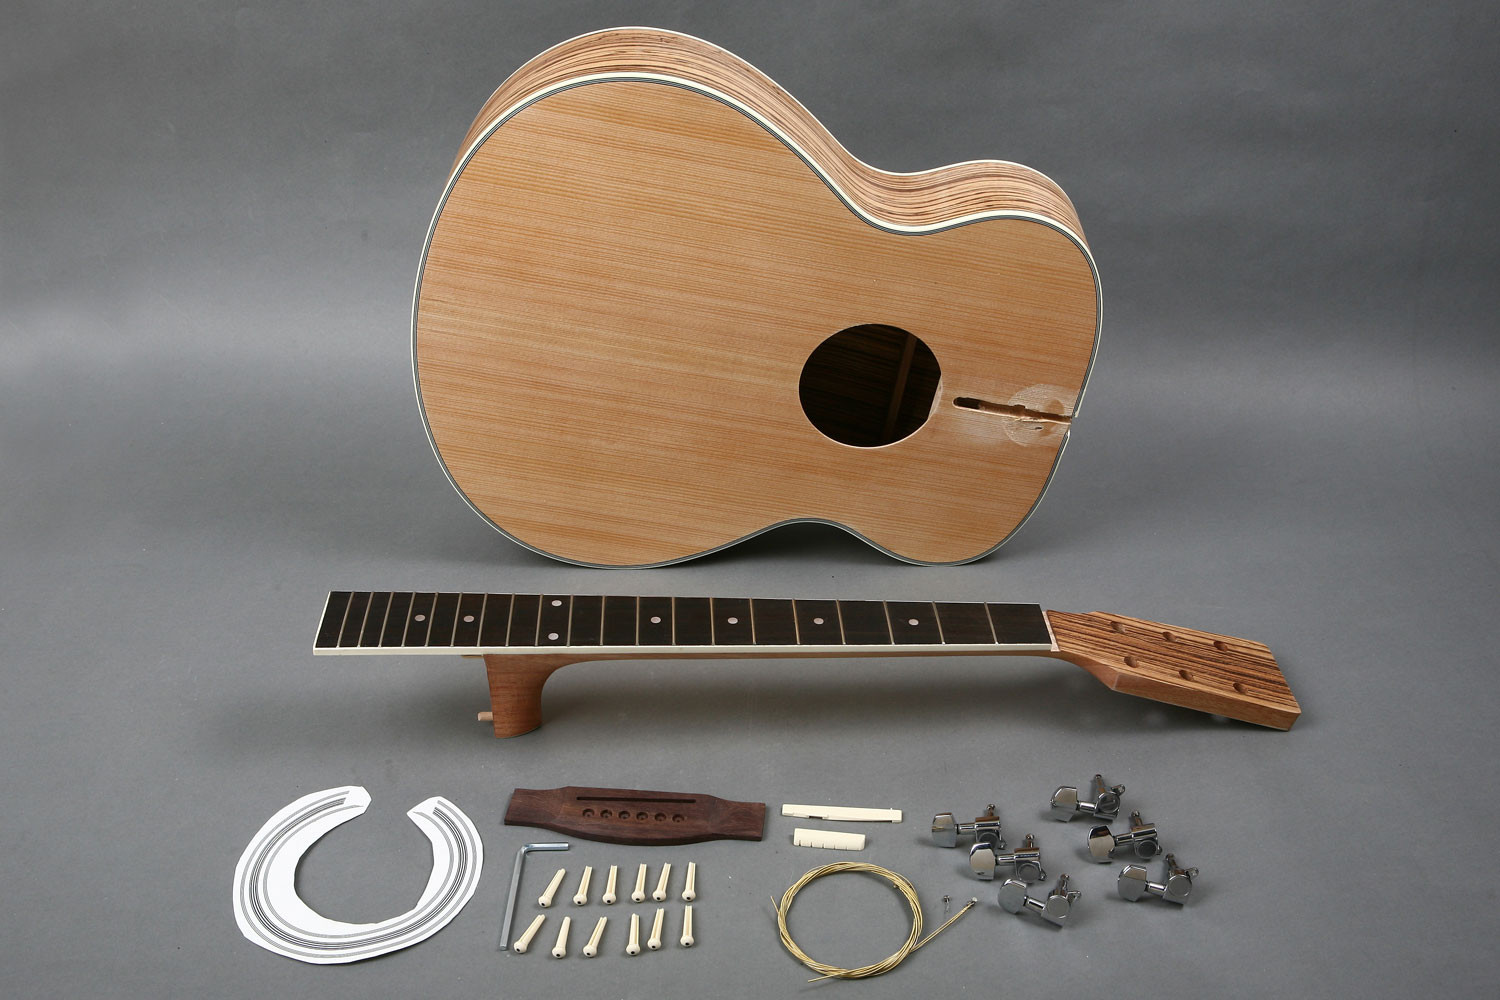 How To Build An Acoustic Guitar